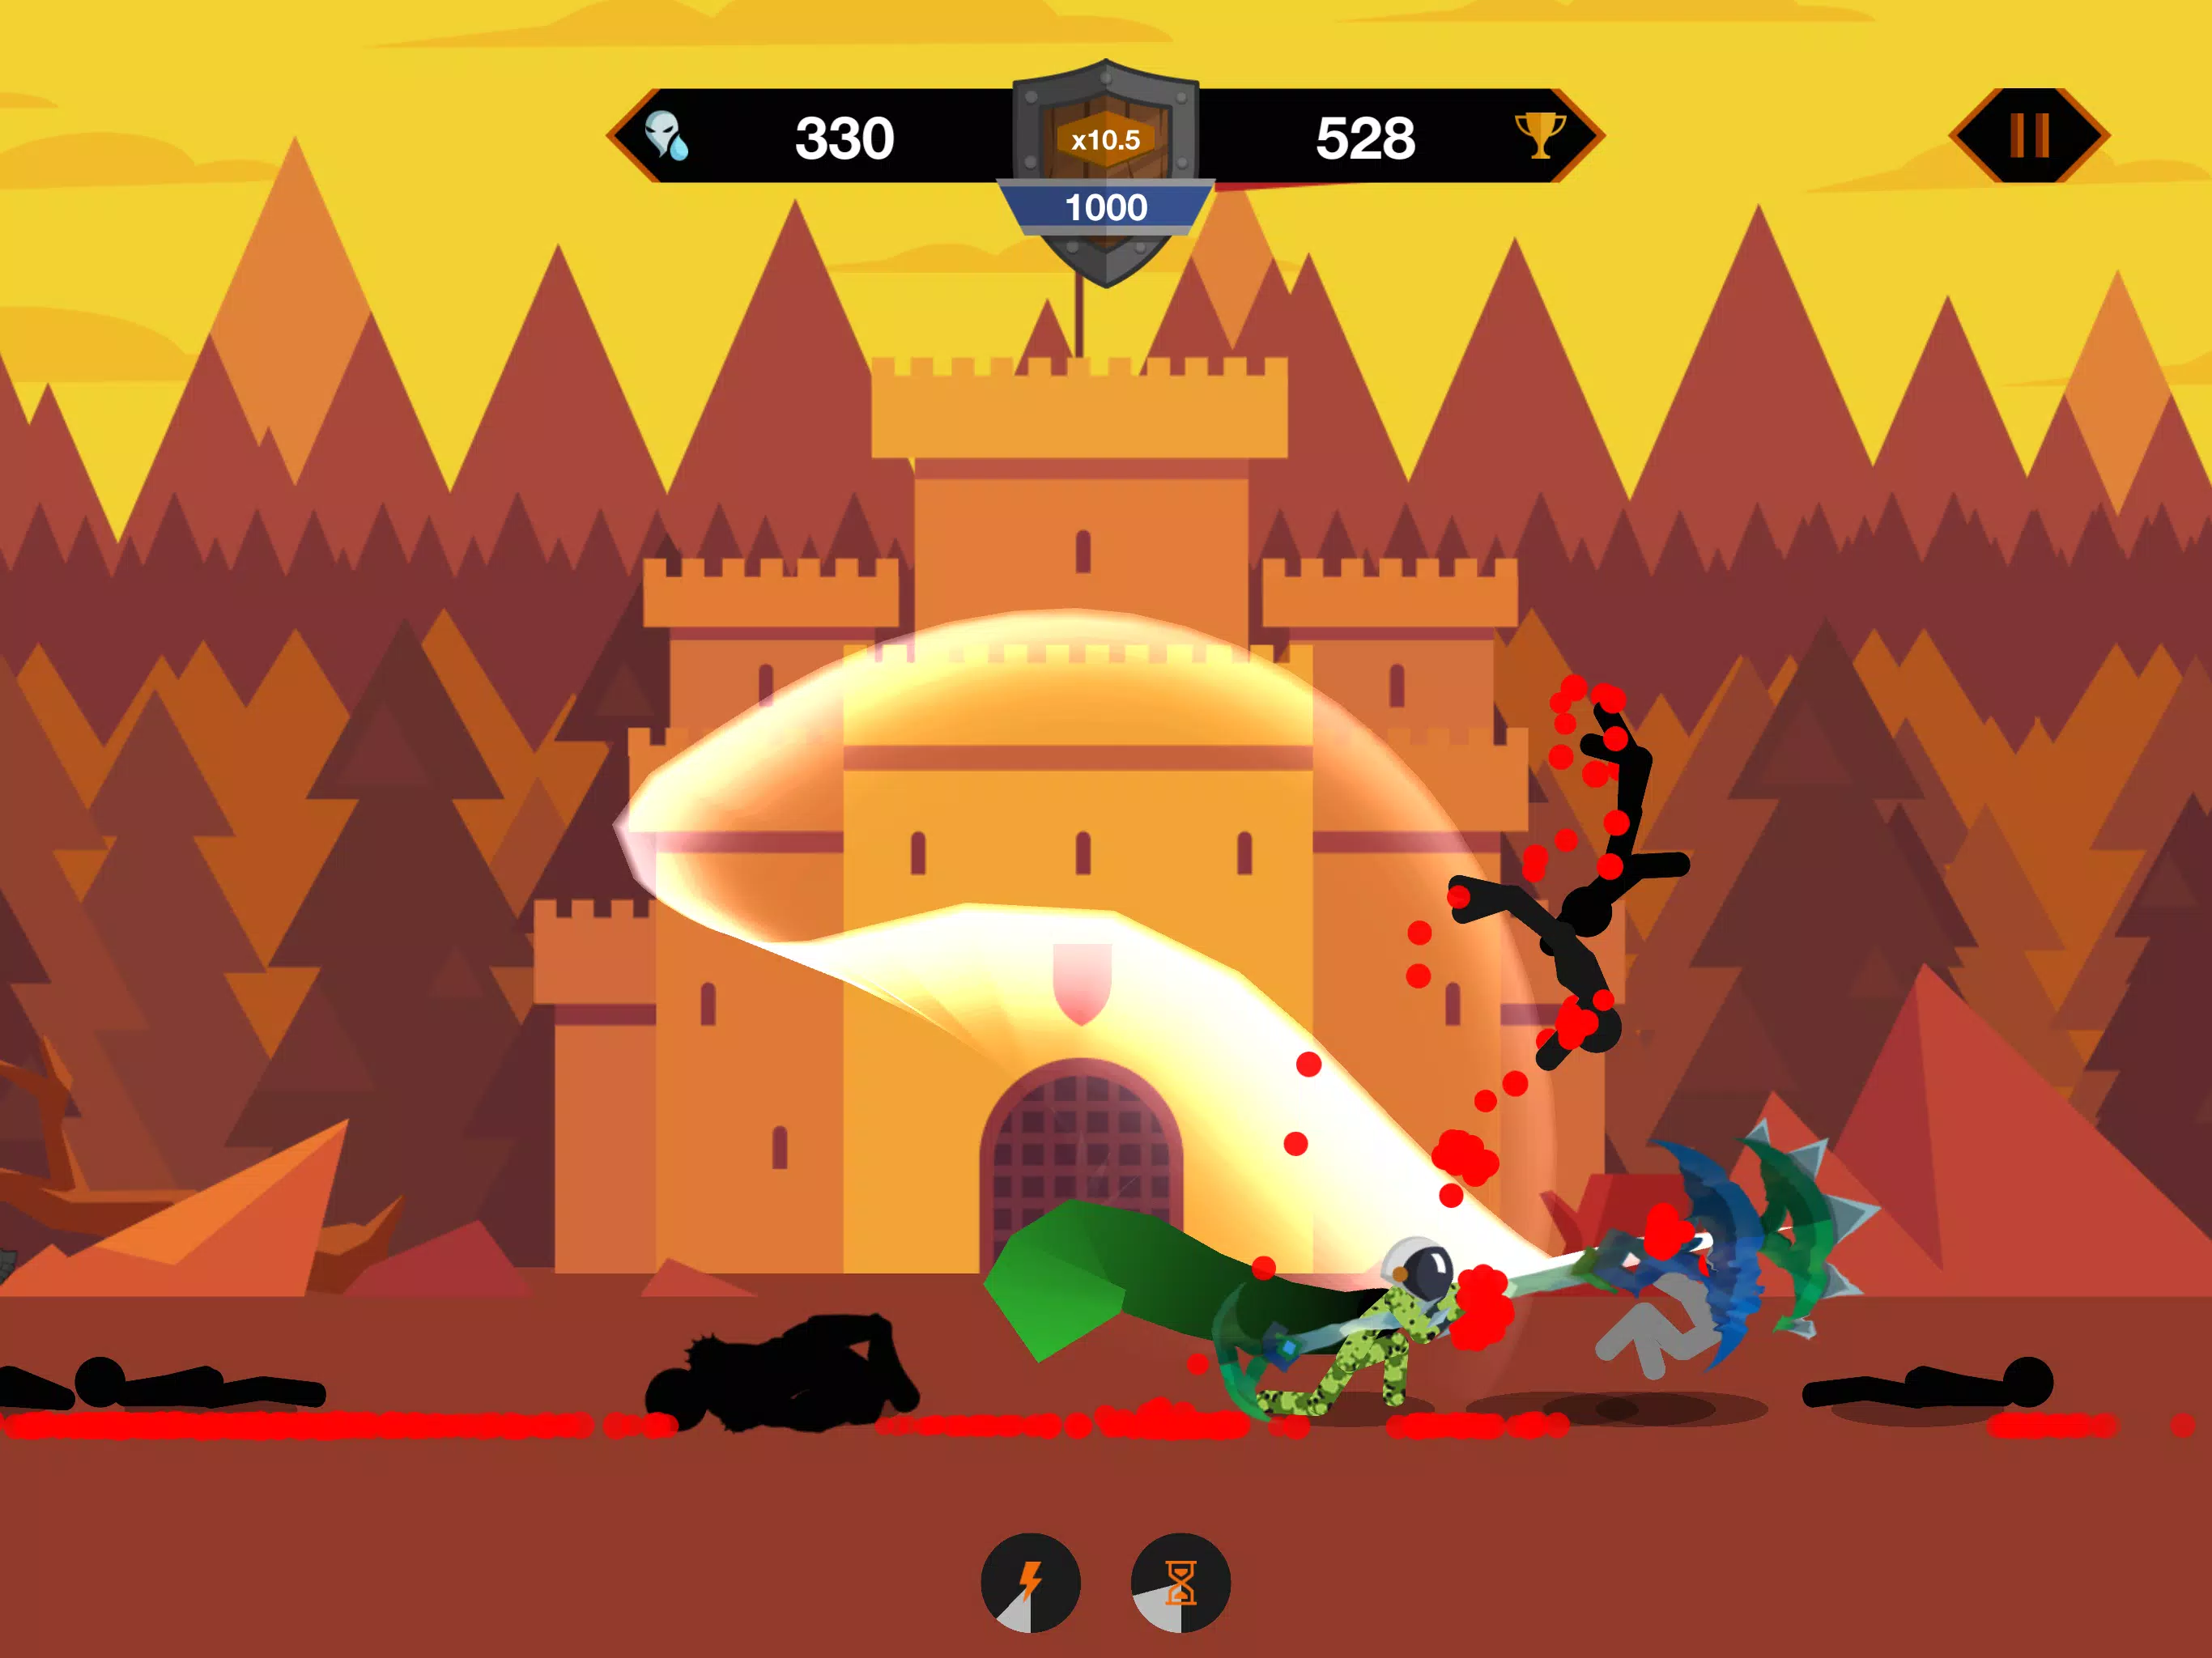 Stick Fight 2 APK para Android - Download